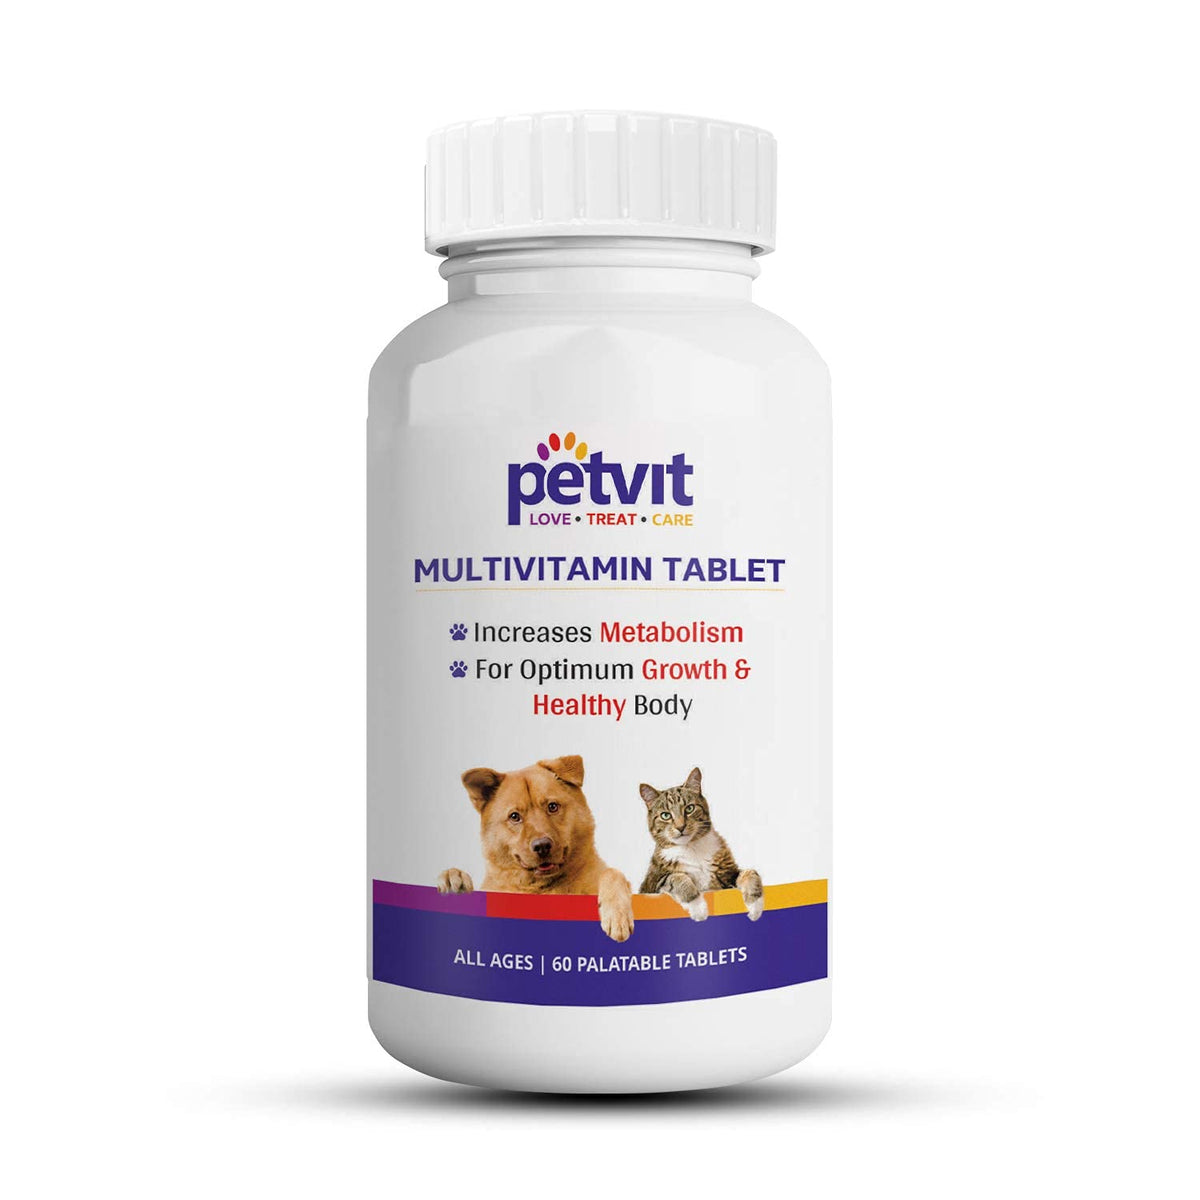 Petvit Multivitamin & Multimineral Supplement with 18 Ingredients for Skin-Coat, Joint Care, Digestion, Heart & Immunity for Dogs & Cats - 60 Palatable Chewable Tablets | for All Age Group